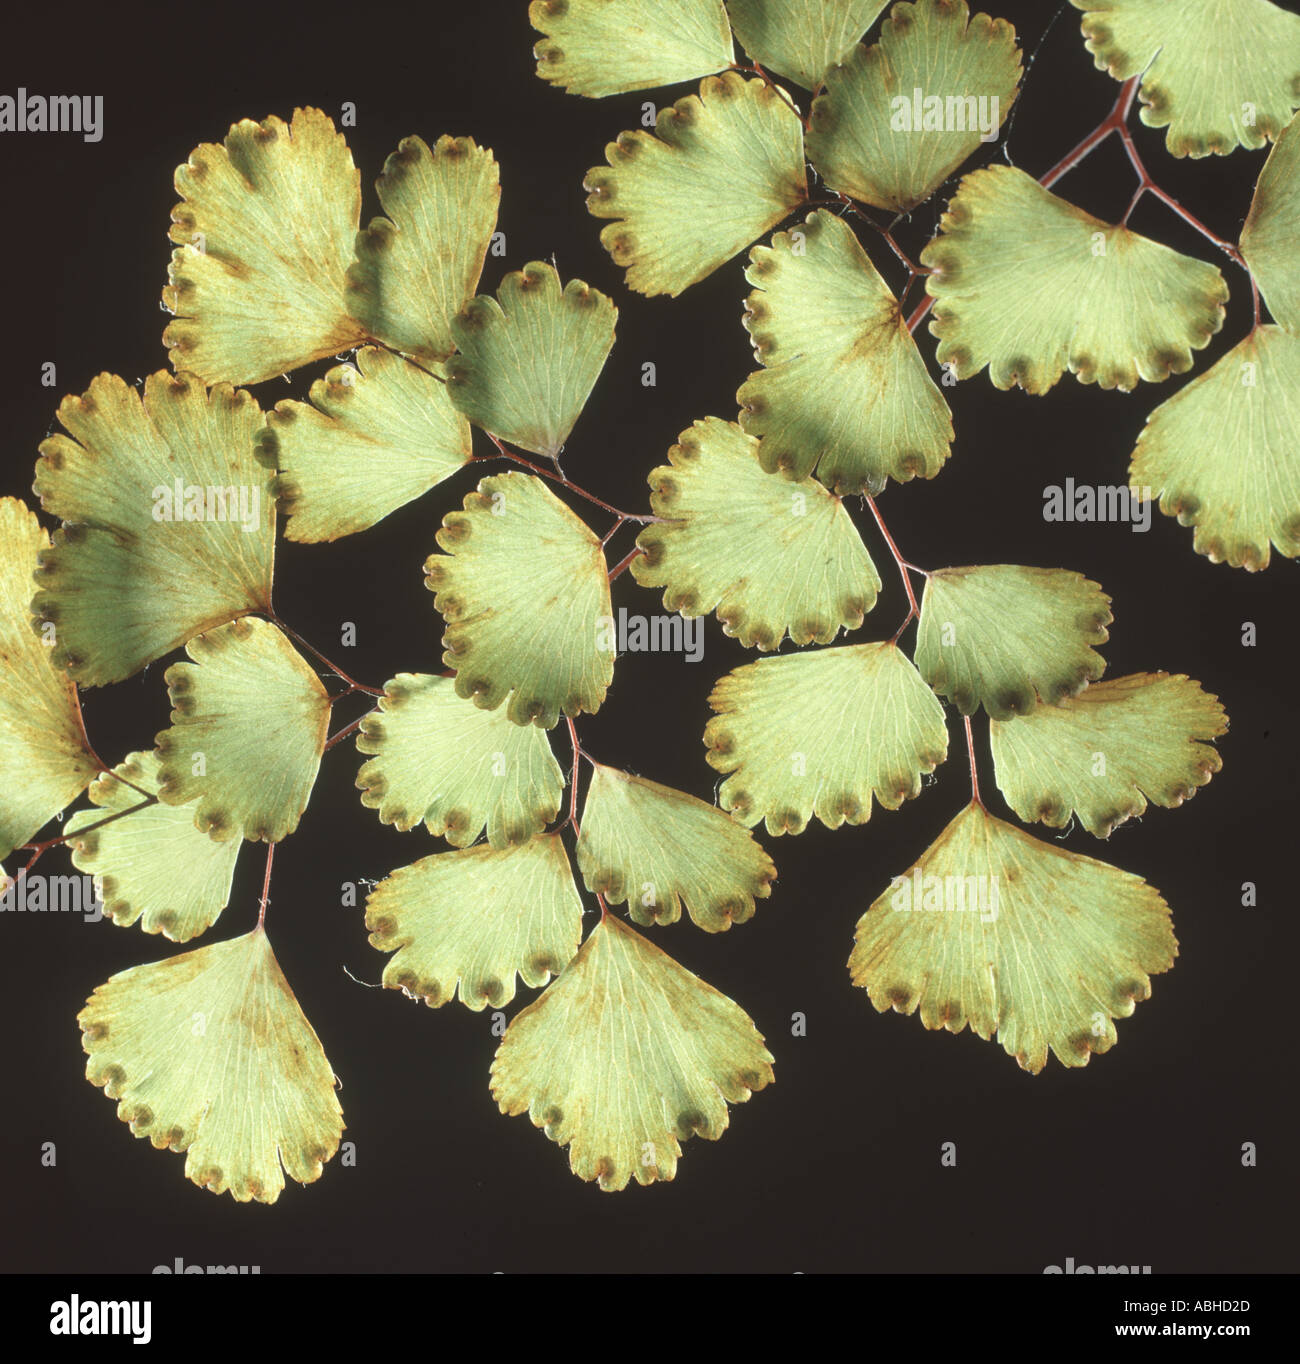 Maidenhair fern Adiantum spp leaves or fronds with spore cases backlit Stock Photo